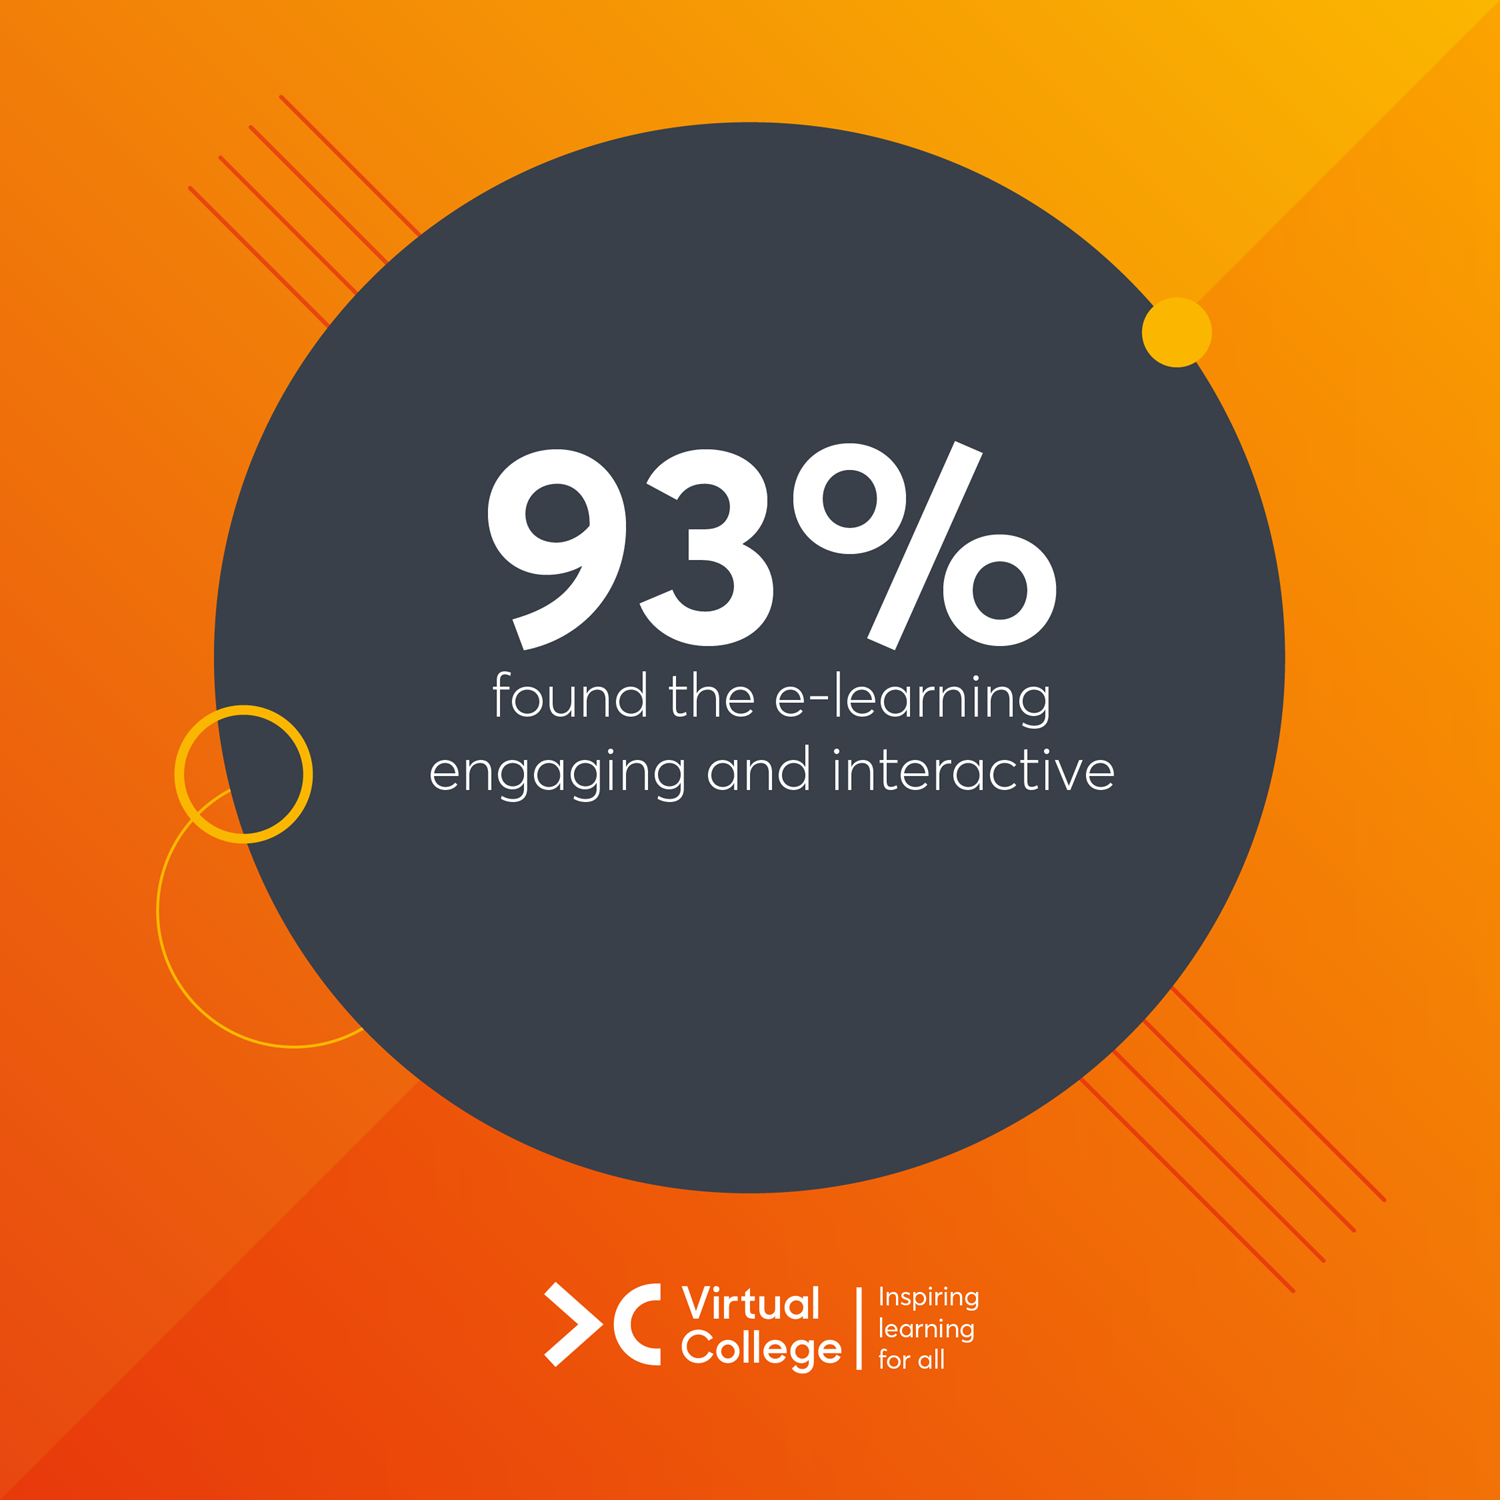 93% found the e-learning engaging and interactive